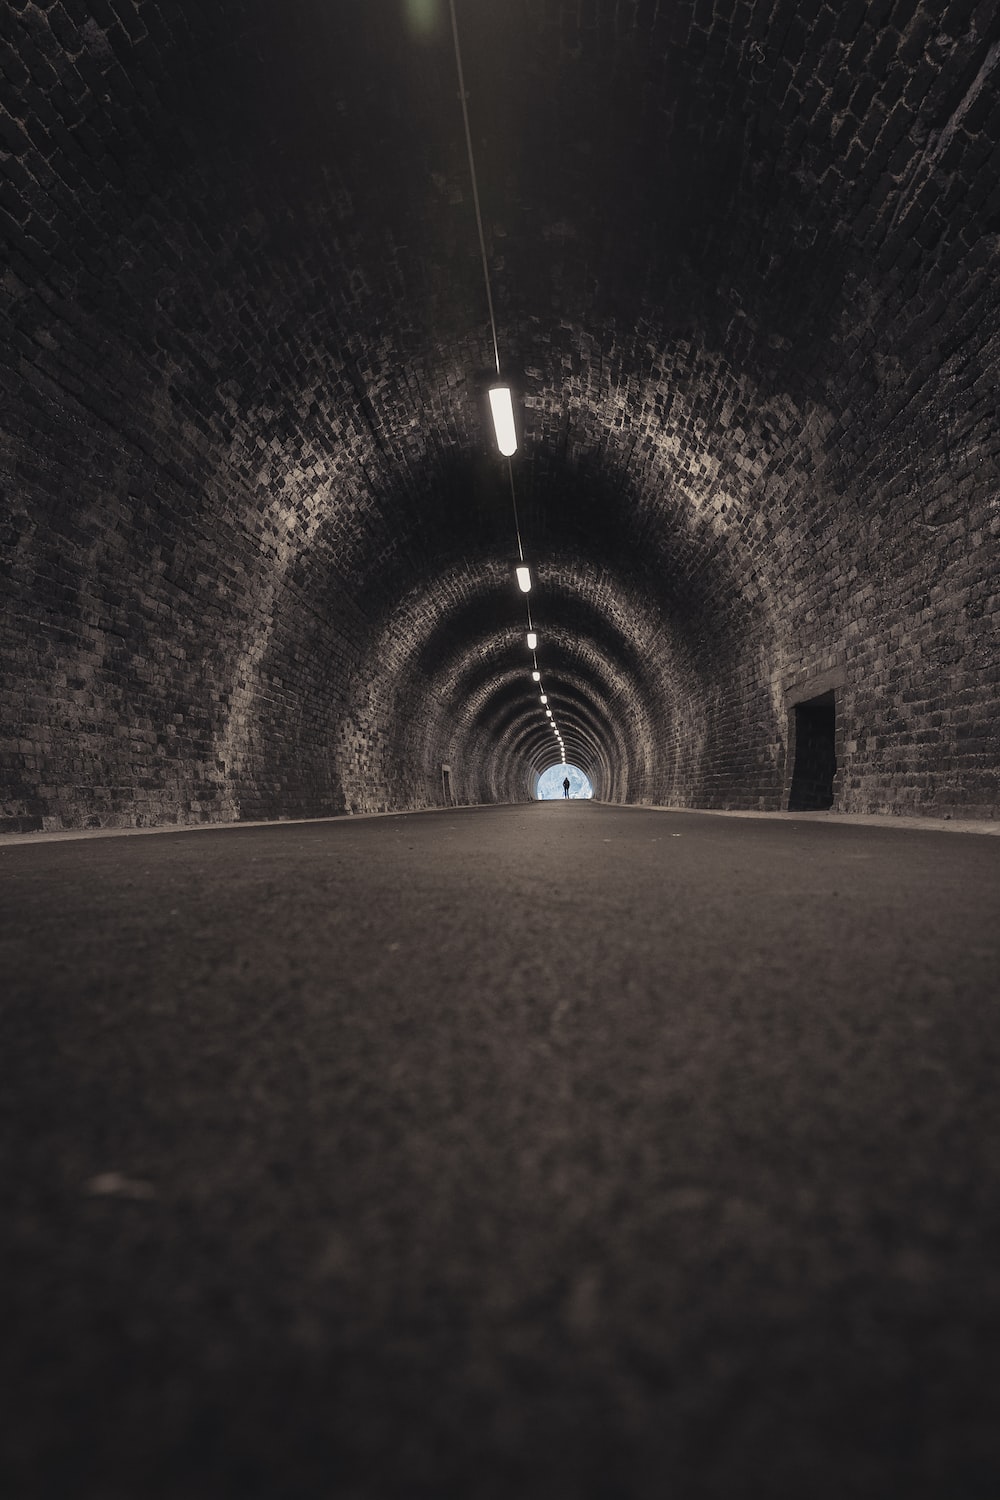 A Last Tunnel Wallpapers